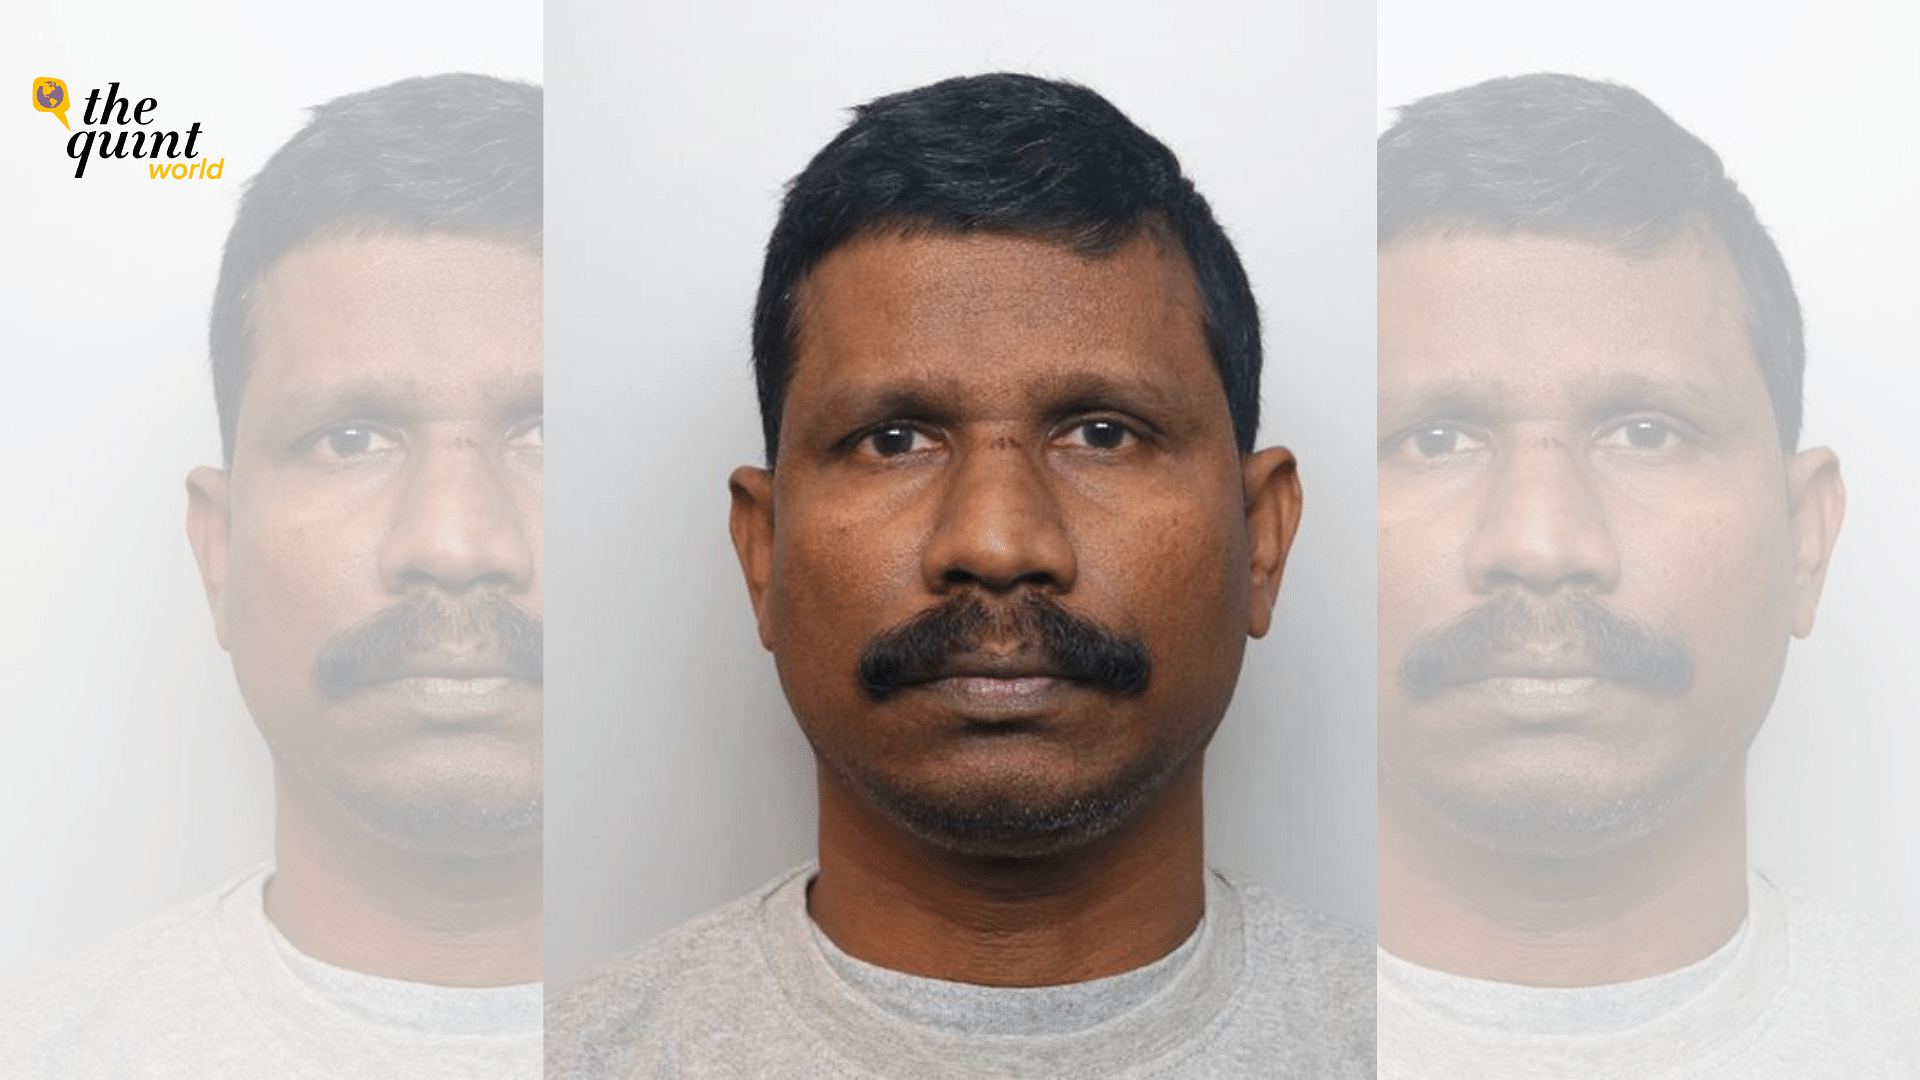 Indian Man From Kerala Faces Life Sentence for Murdering Wife, 2 Children in UK pic